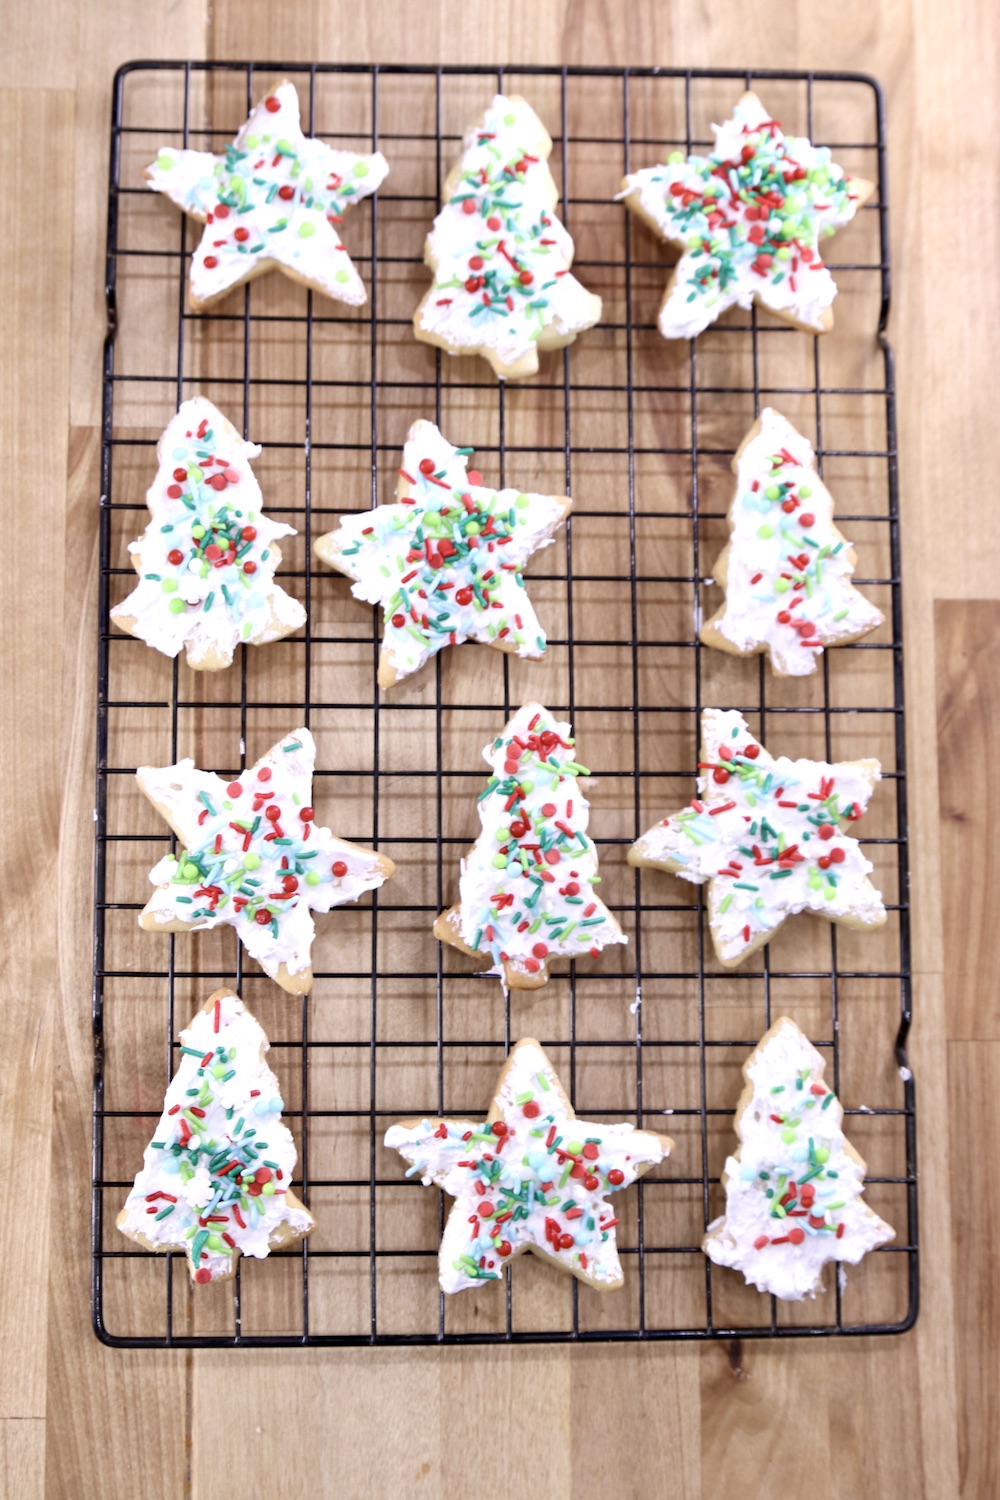 Sugar Cookies with icing and sprinkles on a wire rack